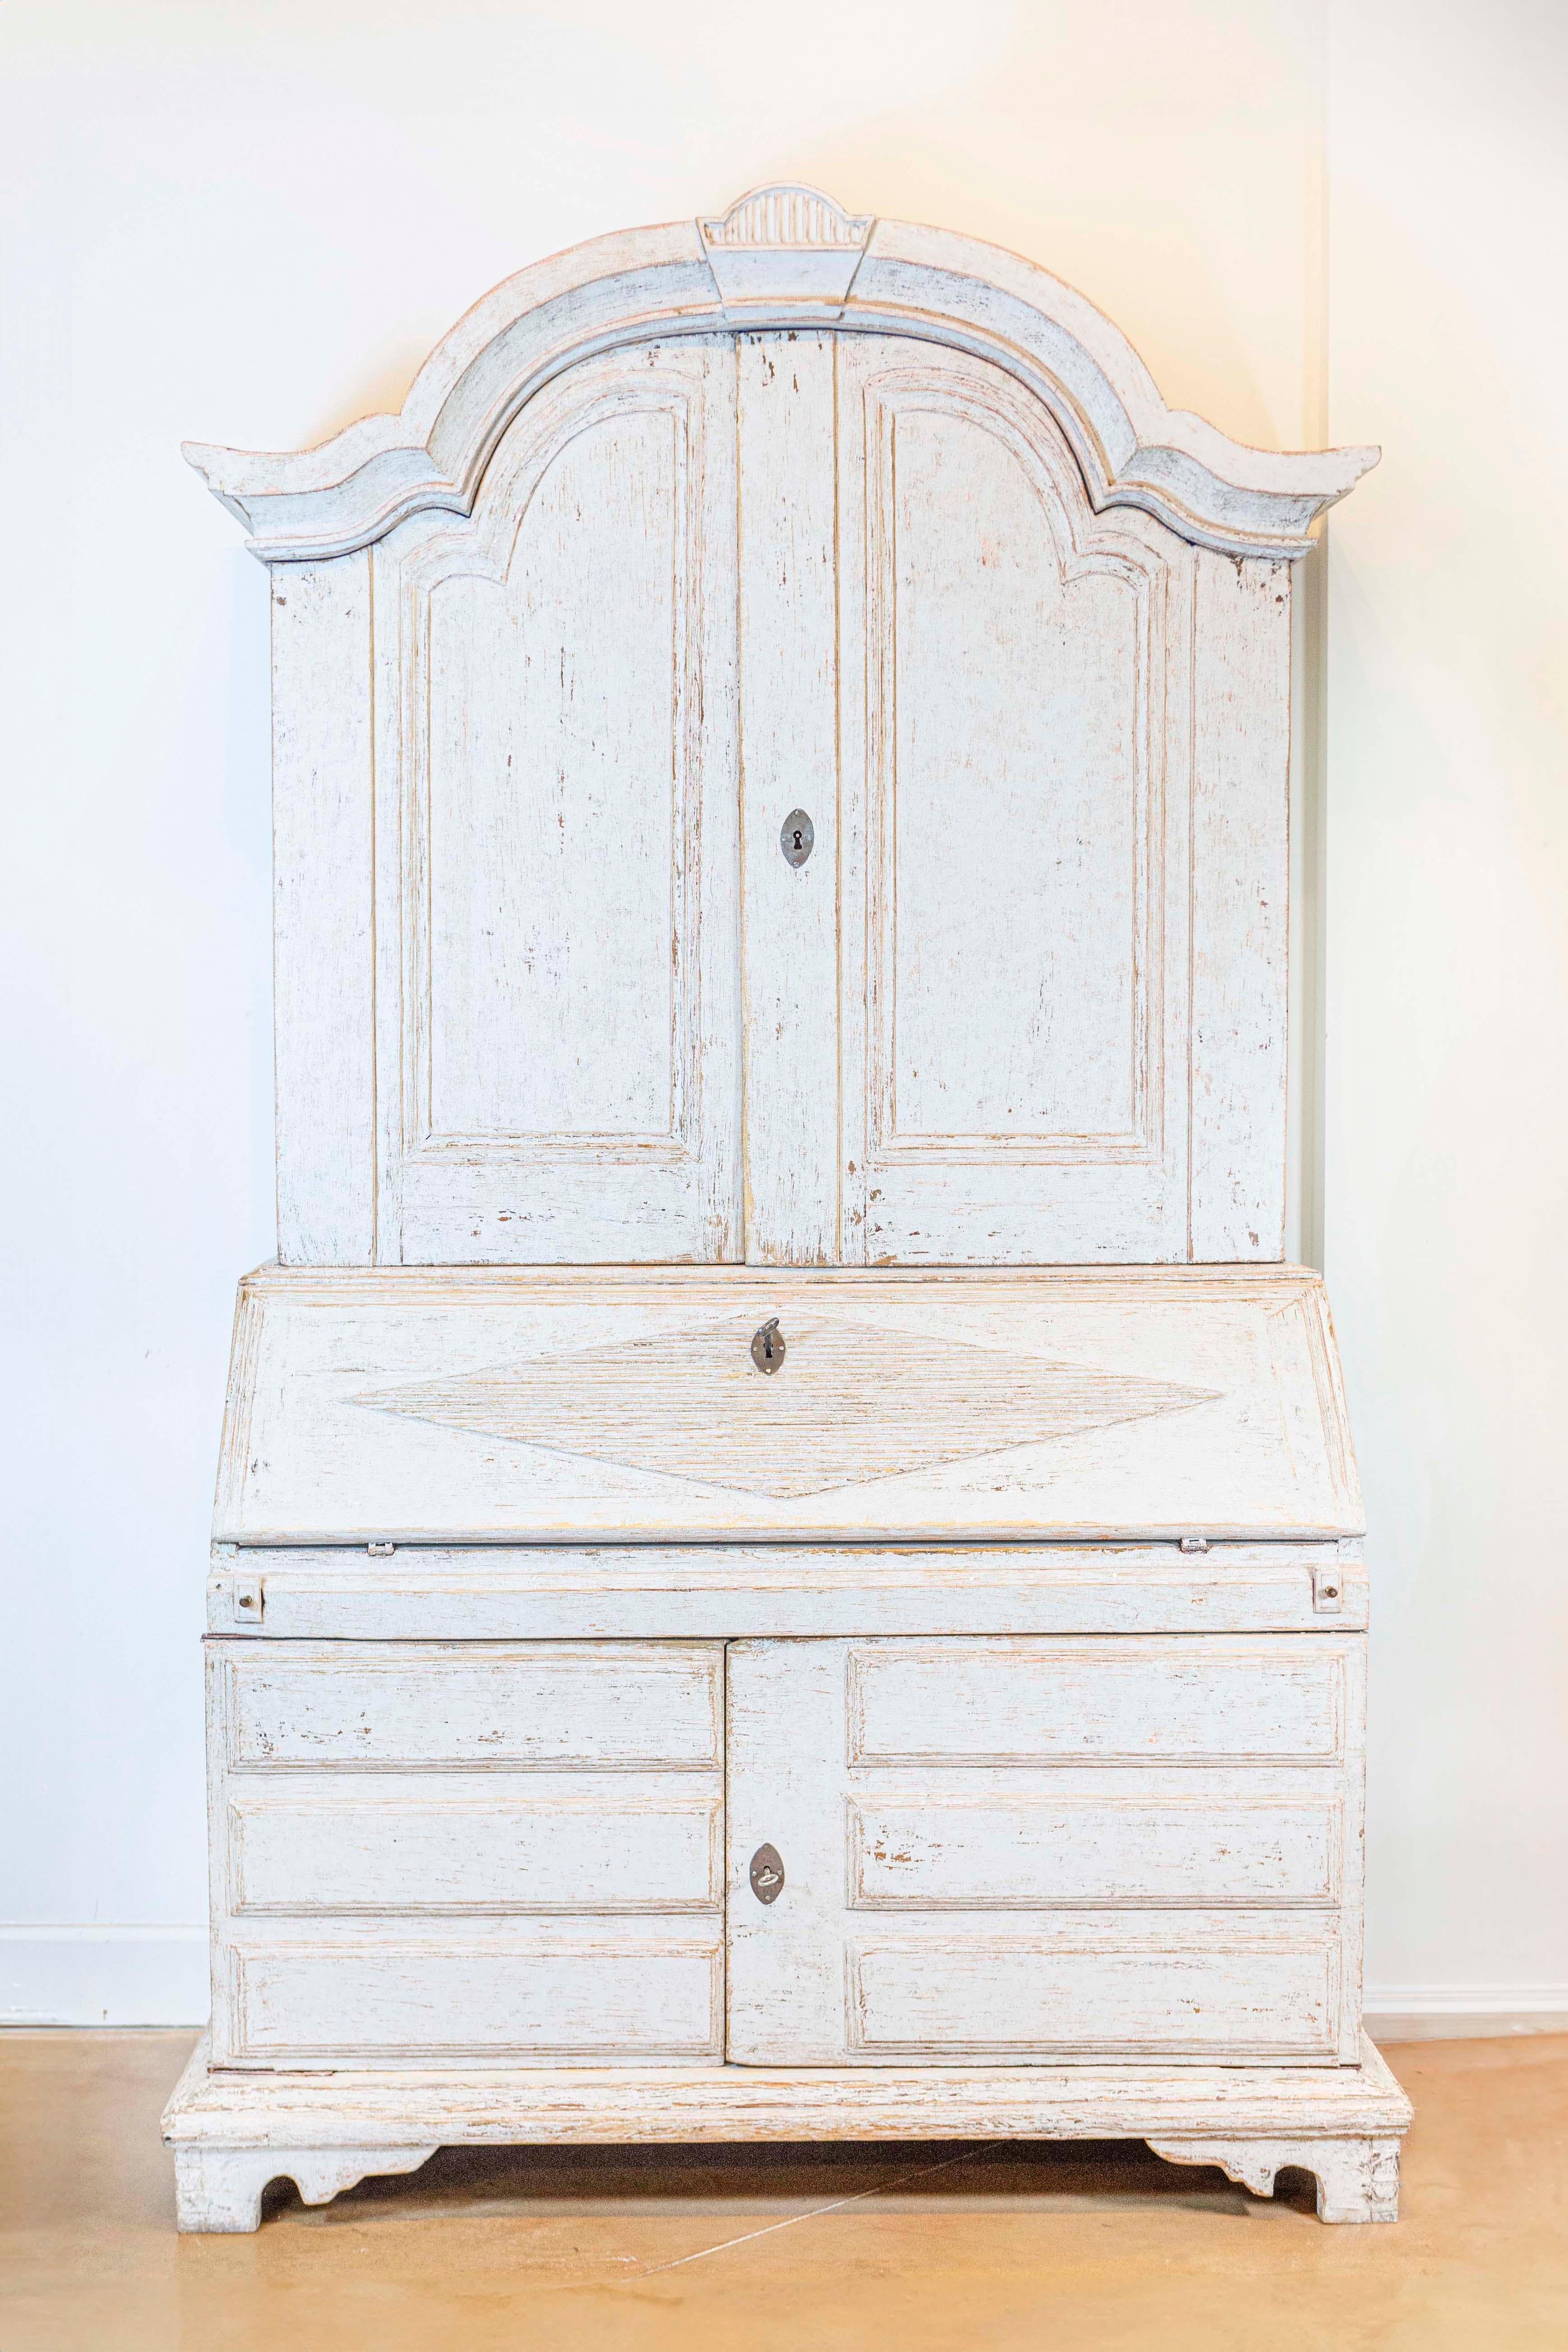 A Swedish tall secretary from Värmland circa 1800, with gray painted finish, carved bonnet top, four doors, slant front desk and bracket feet. Embrace the understated elegance of Swedish Gustavian design with this exquisite tall secretary from